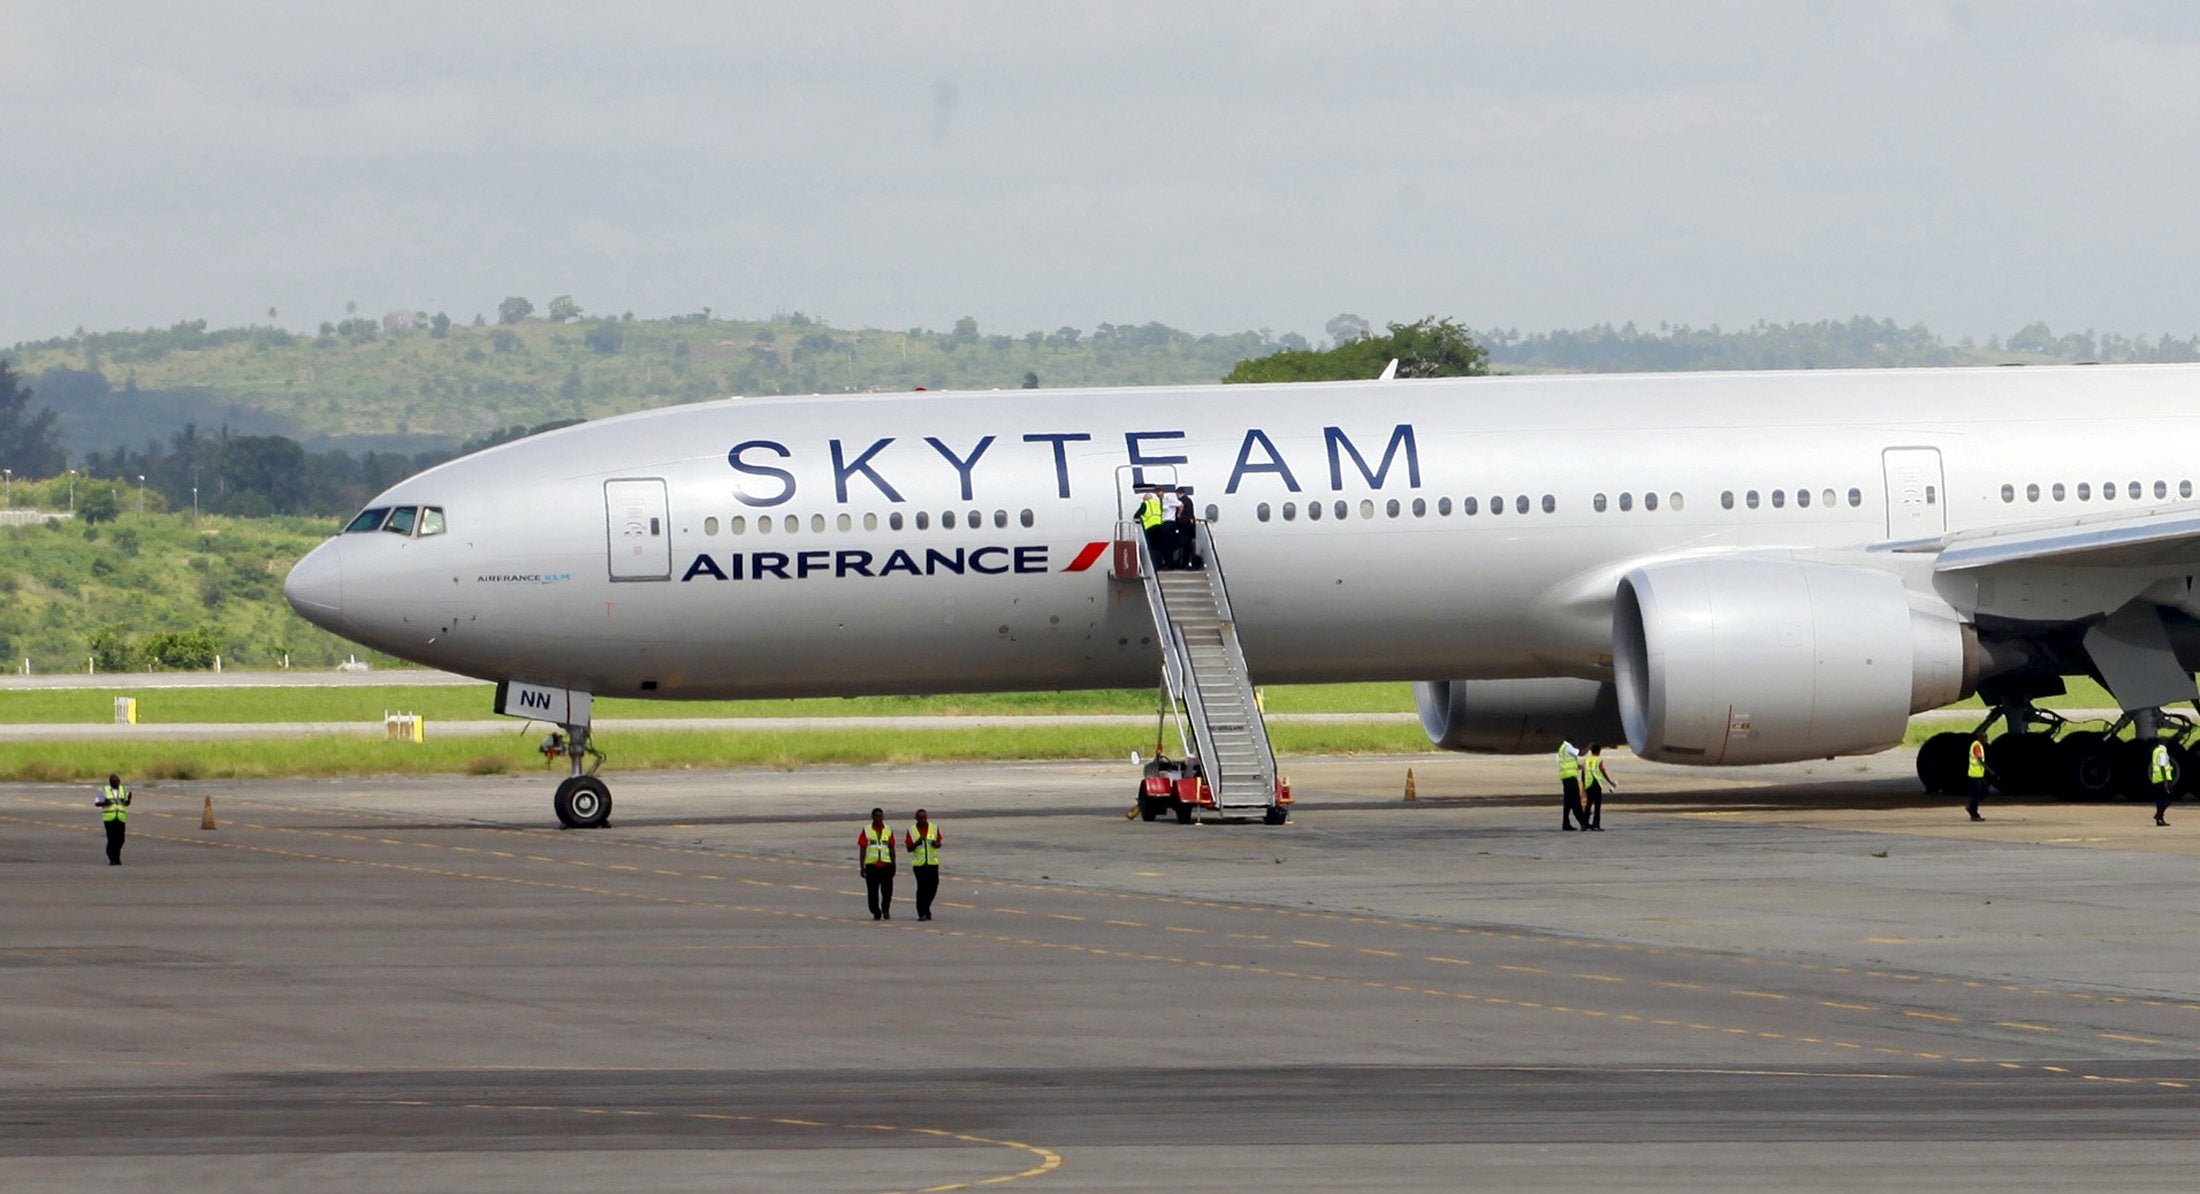 Air France flight 463 on the runway in Mombasa